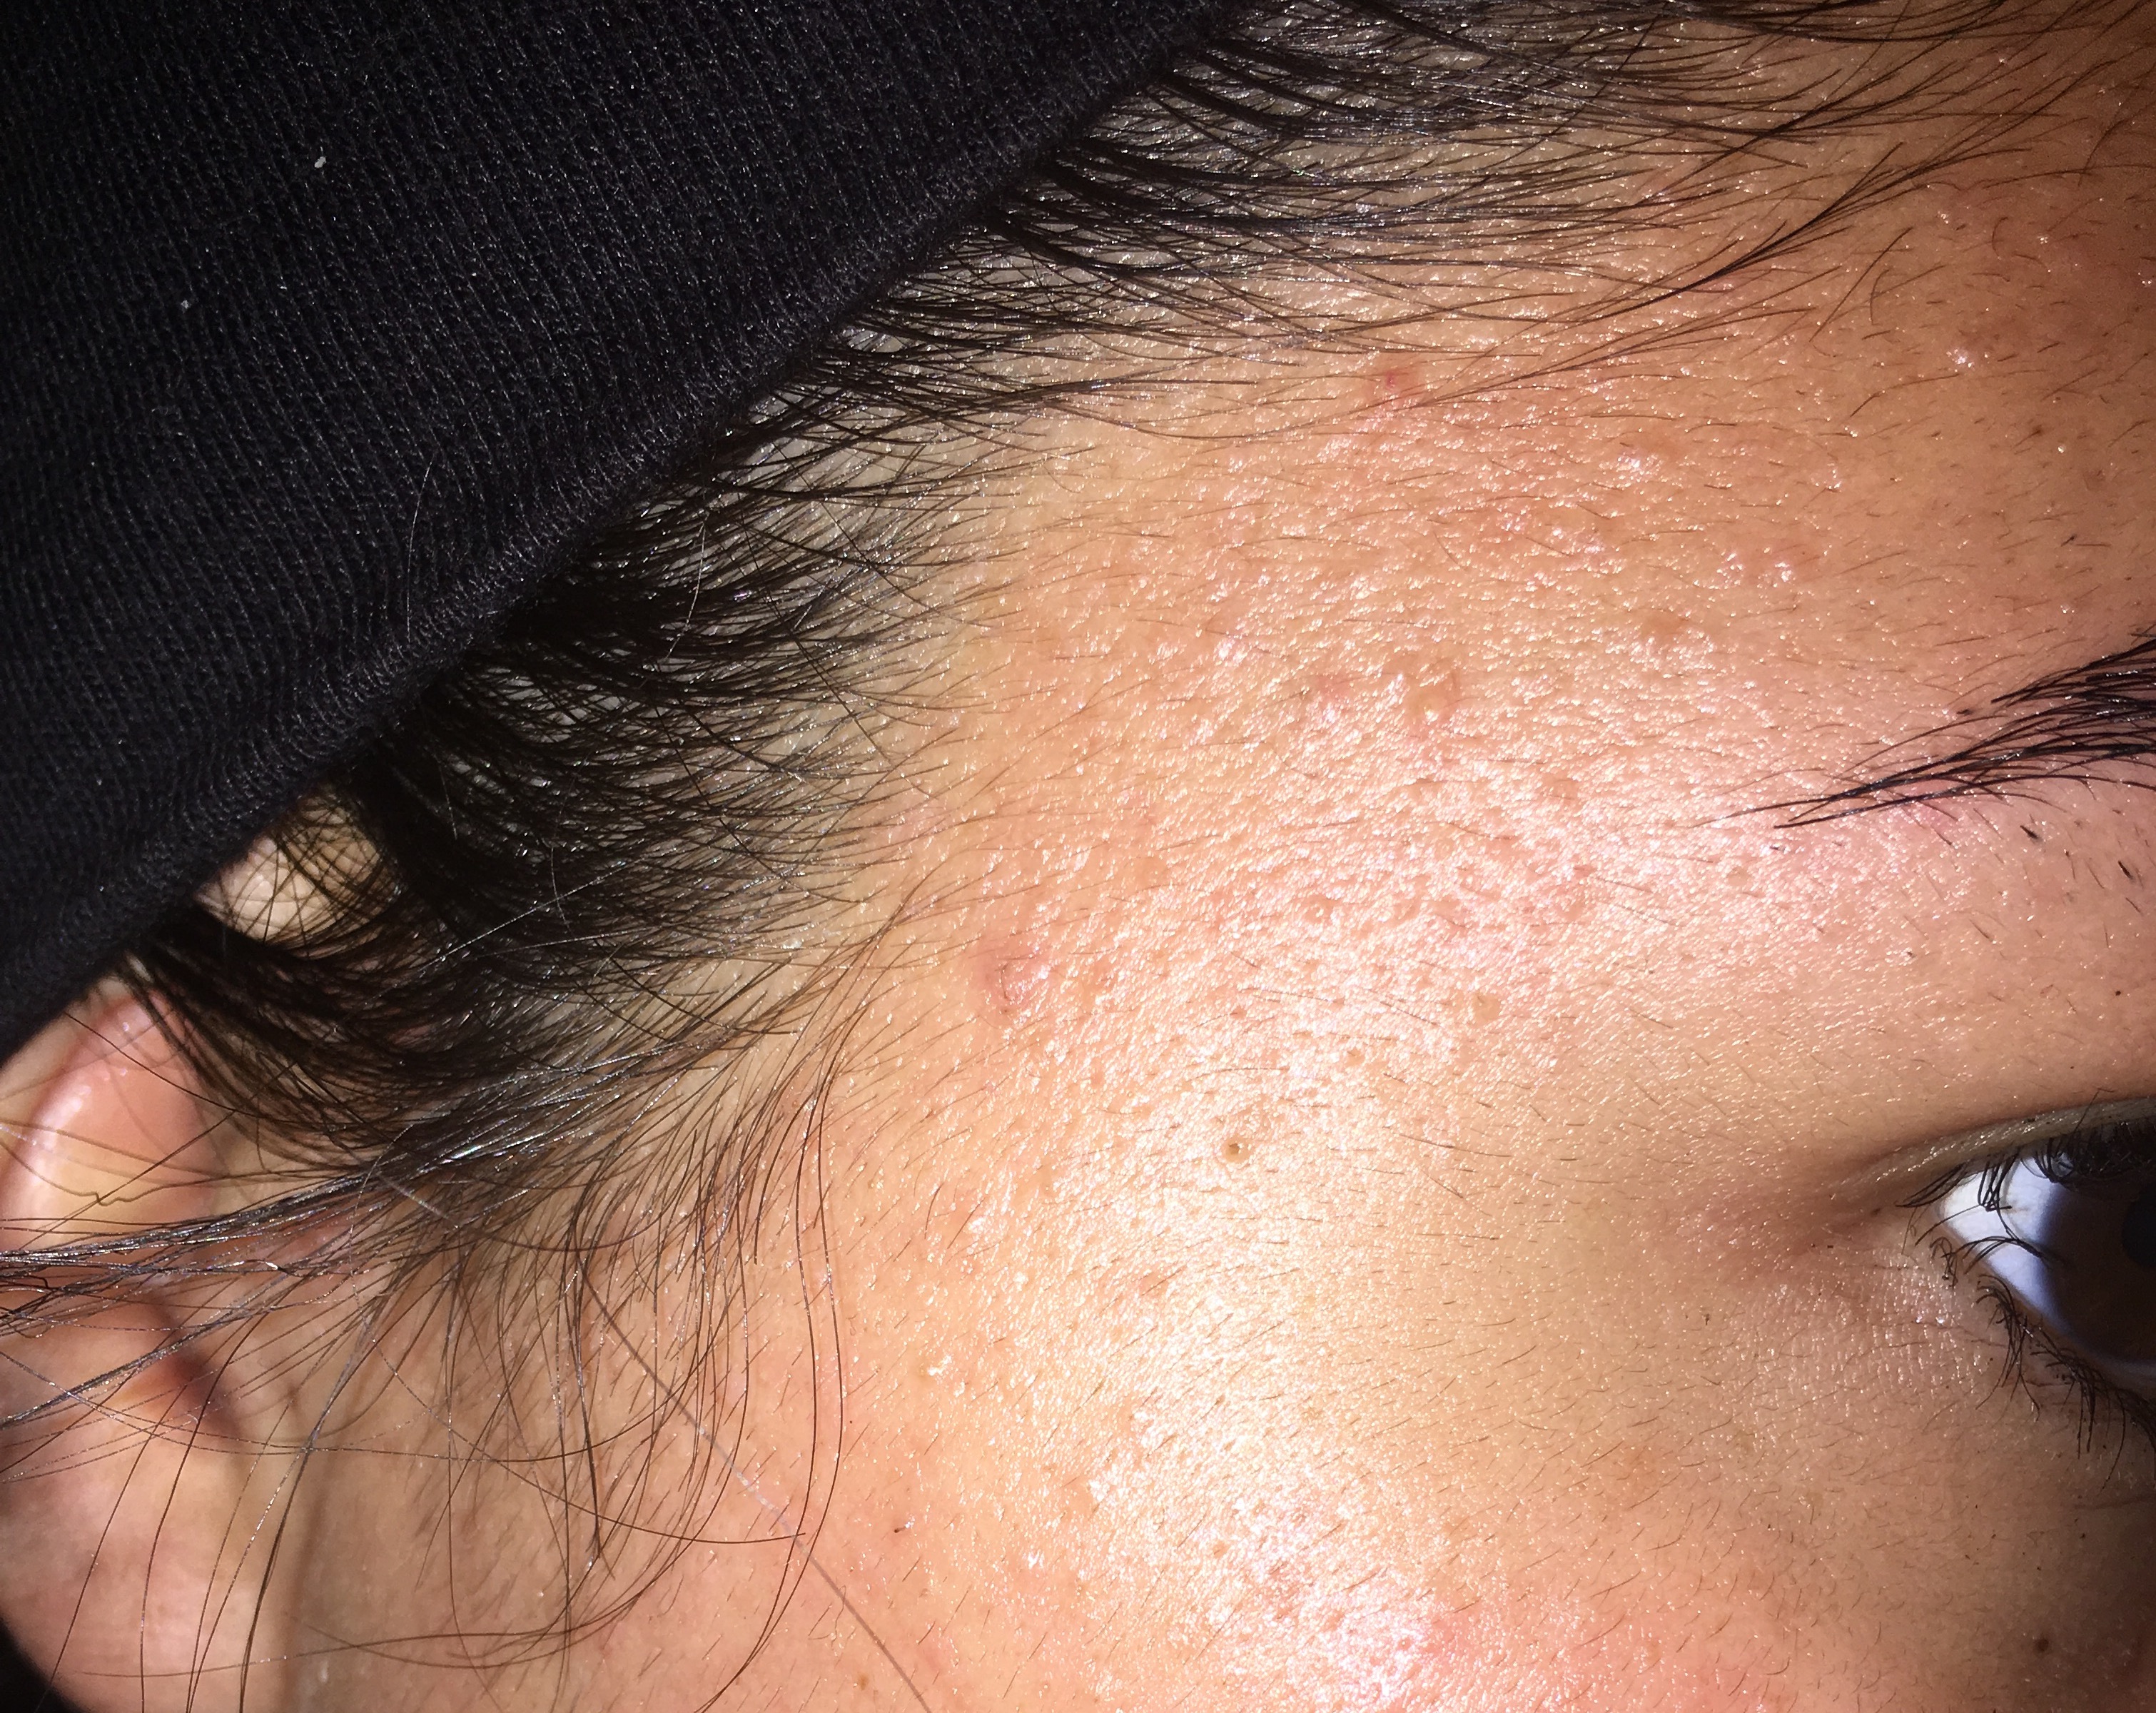 is this acne or Pityrosporum Folliculitis? - General acne discussion